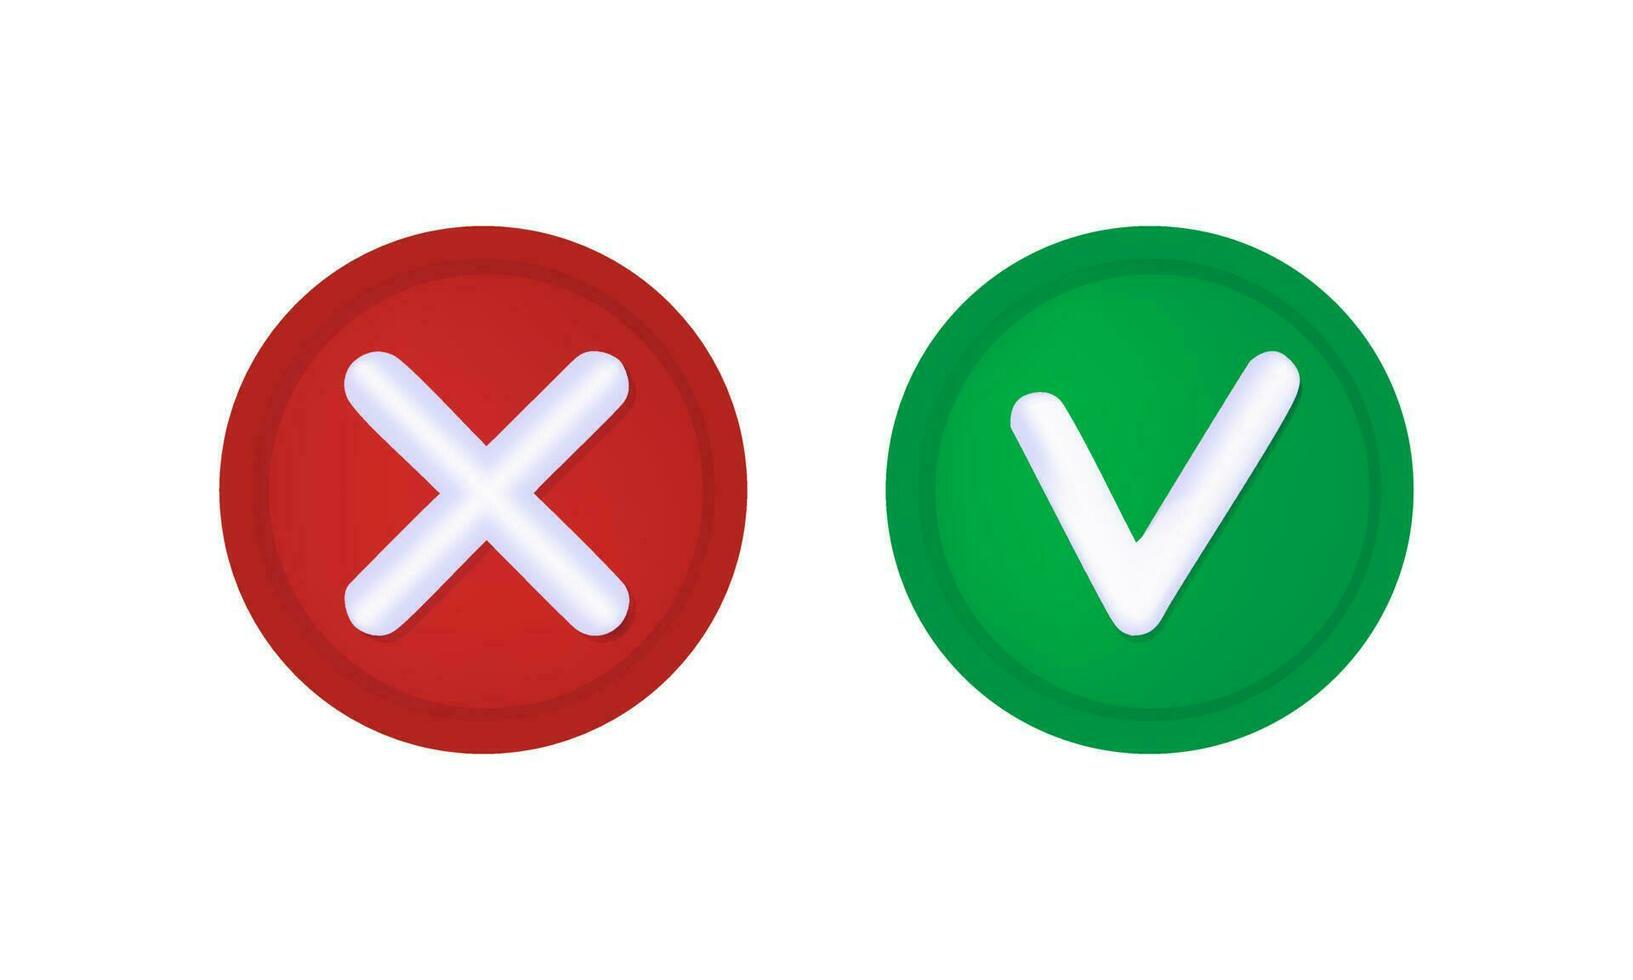 3D Check mark and cross buttons on white background. vector